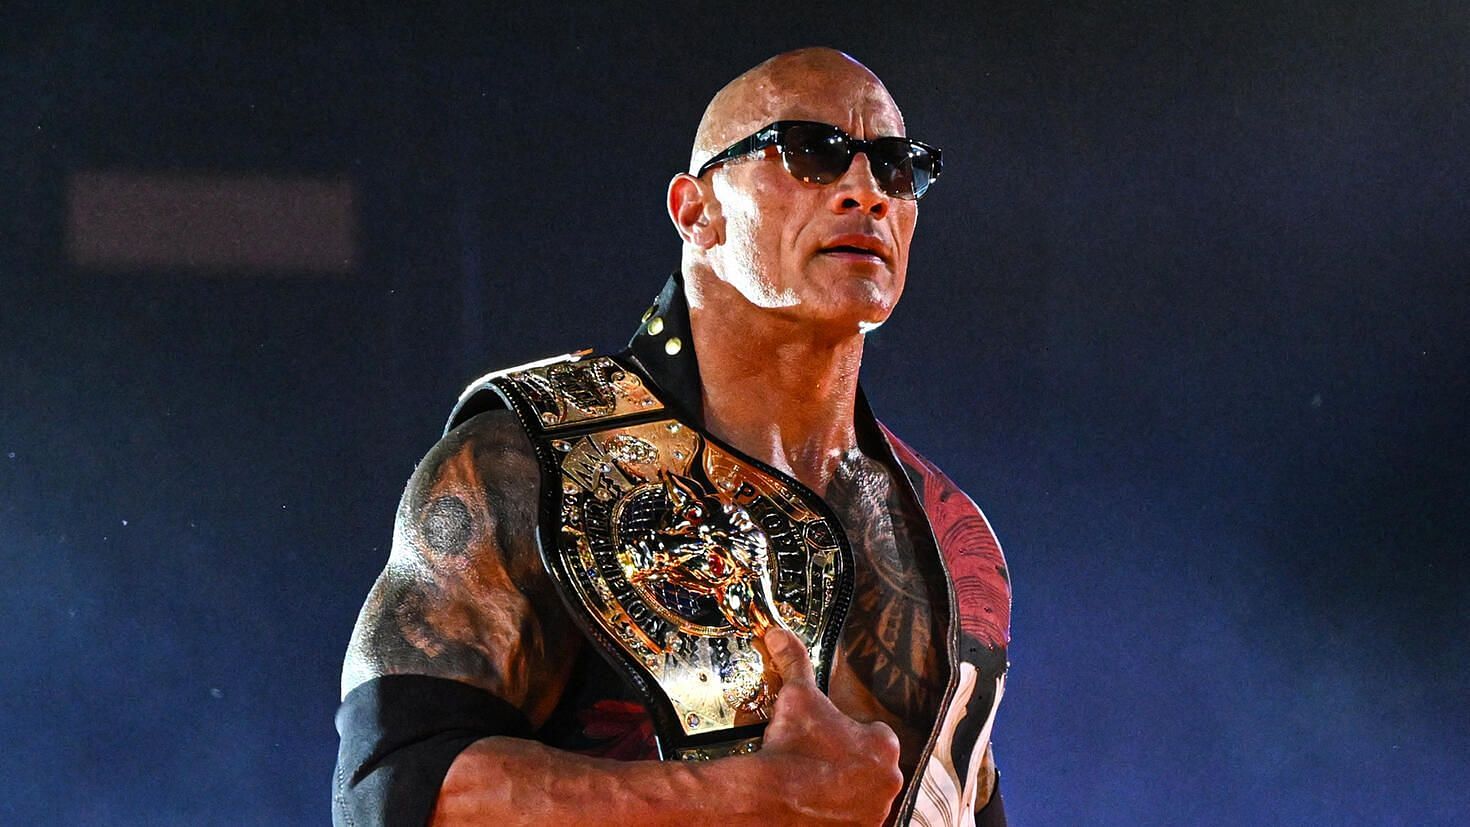 The Rock returned to in-ring competition this week at WrestleMania